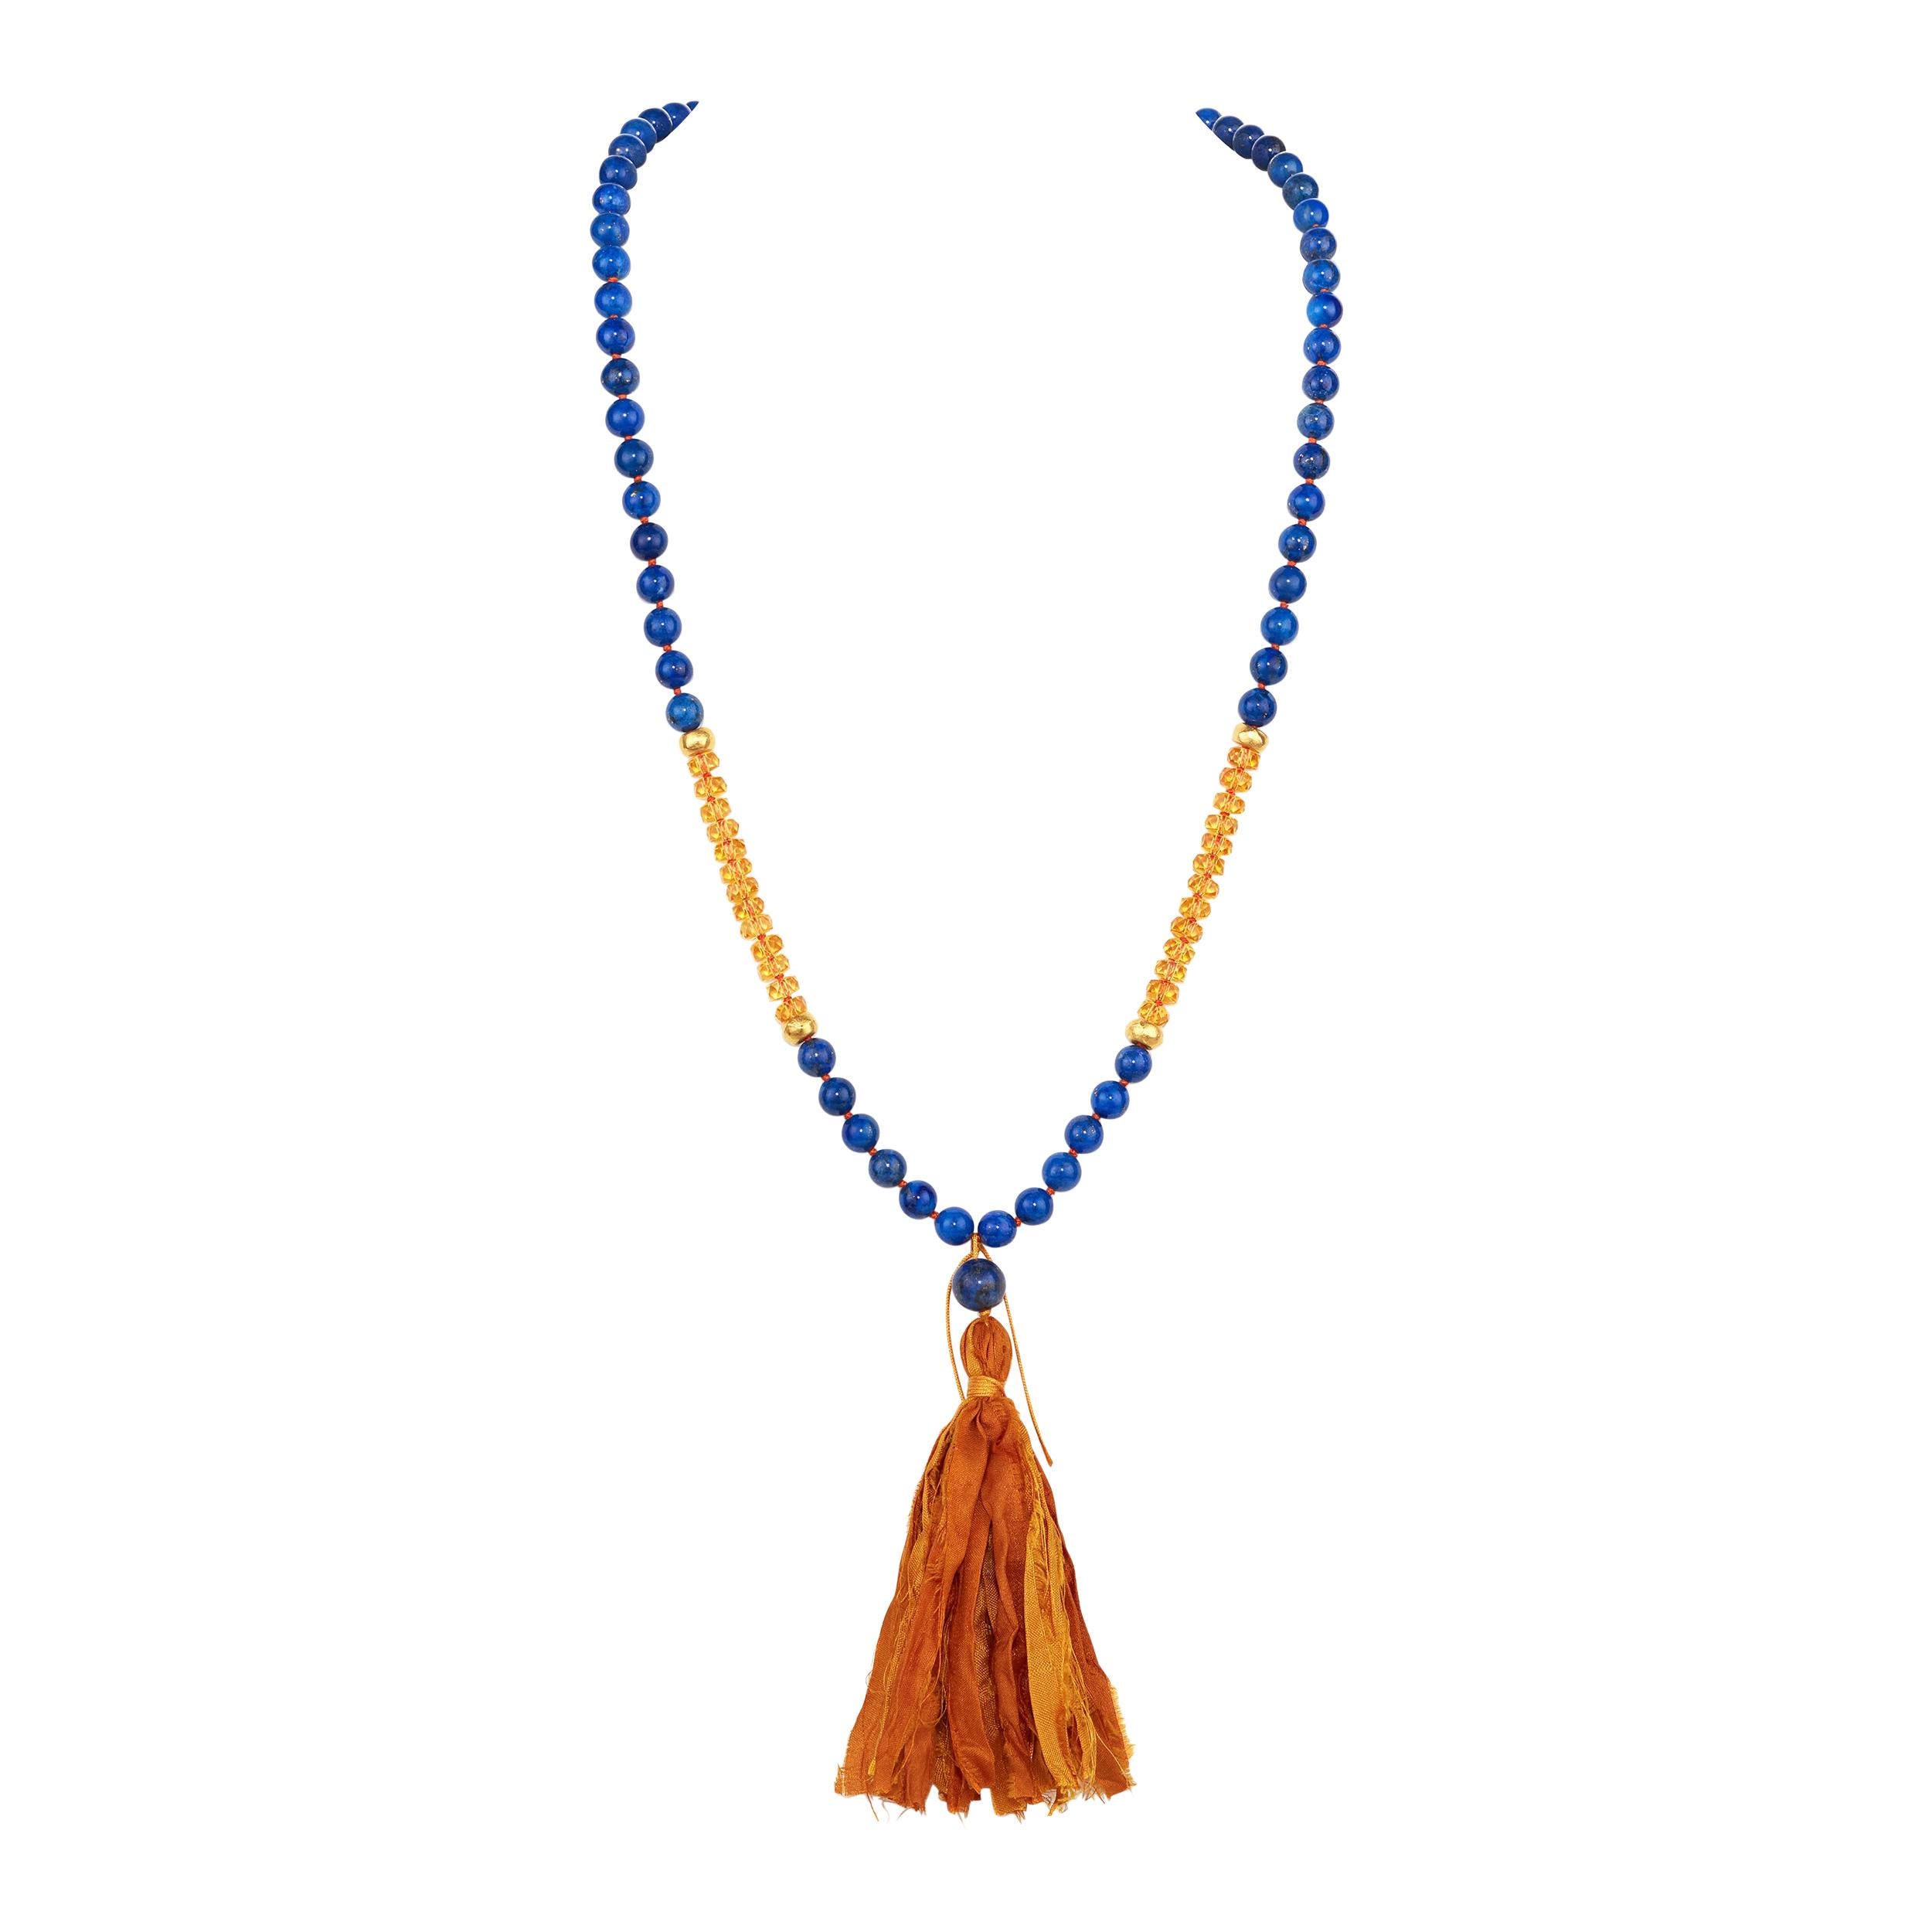 Lapis and Citrine Mala / Prayer / Meditation Necklace in 18 Karat Yellow Gold For Sale